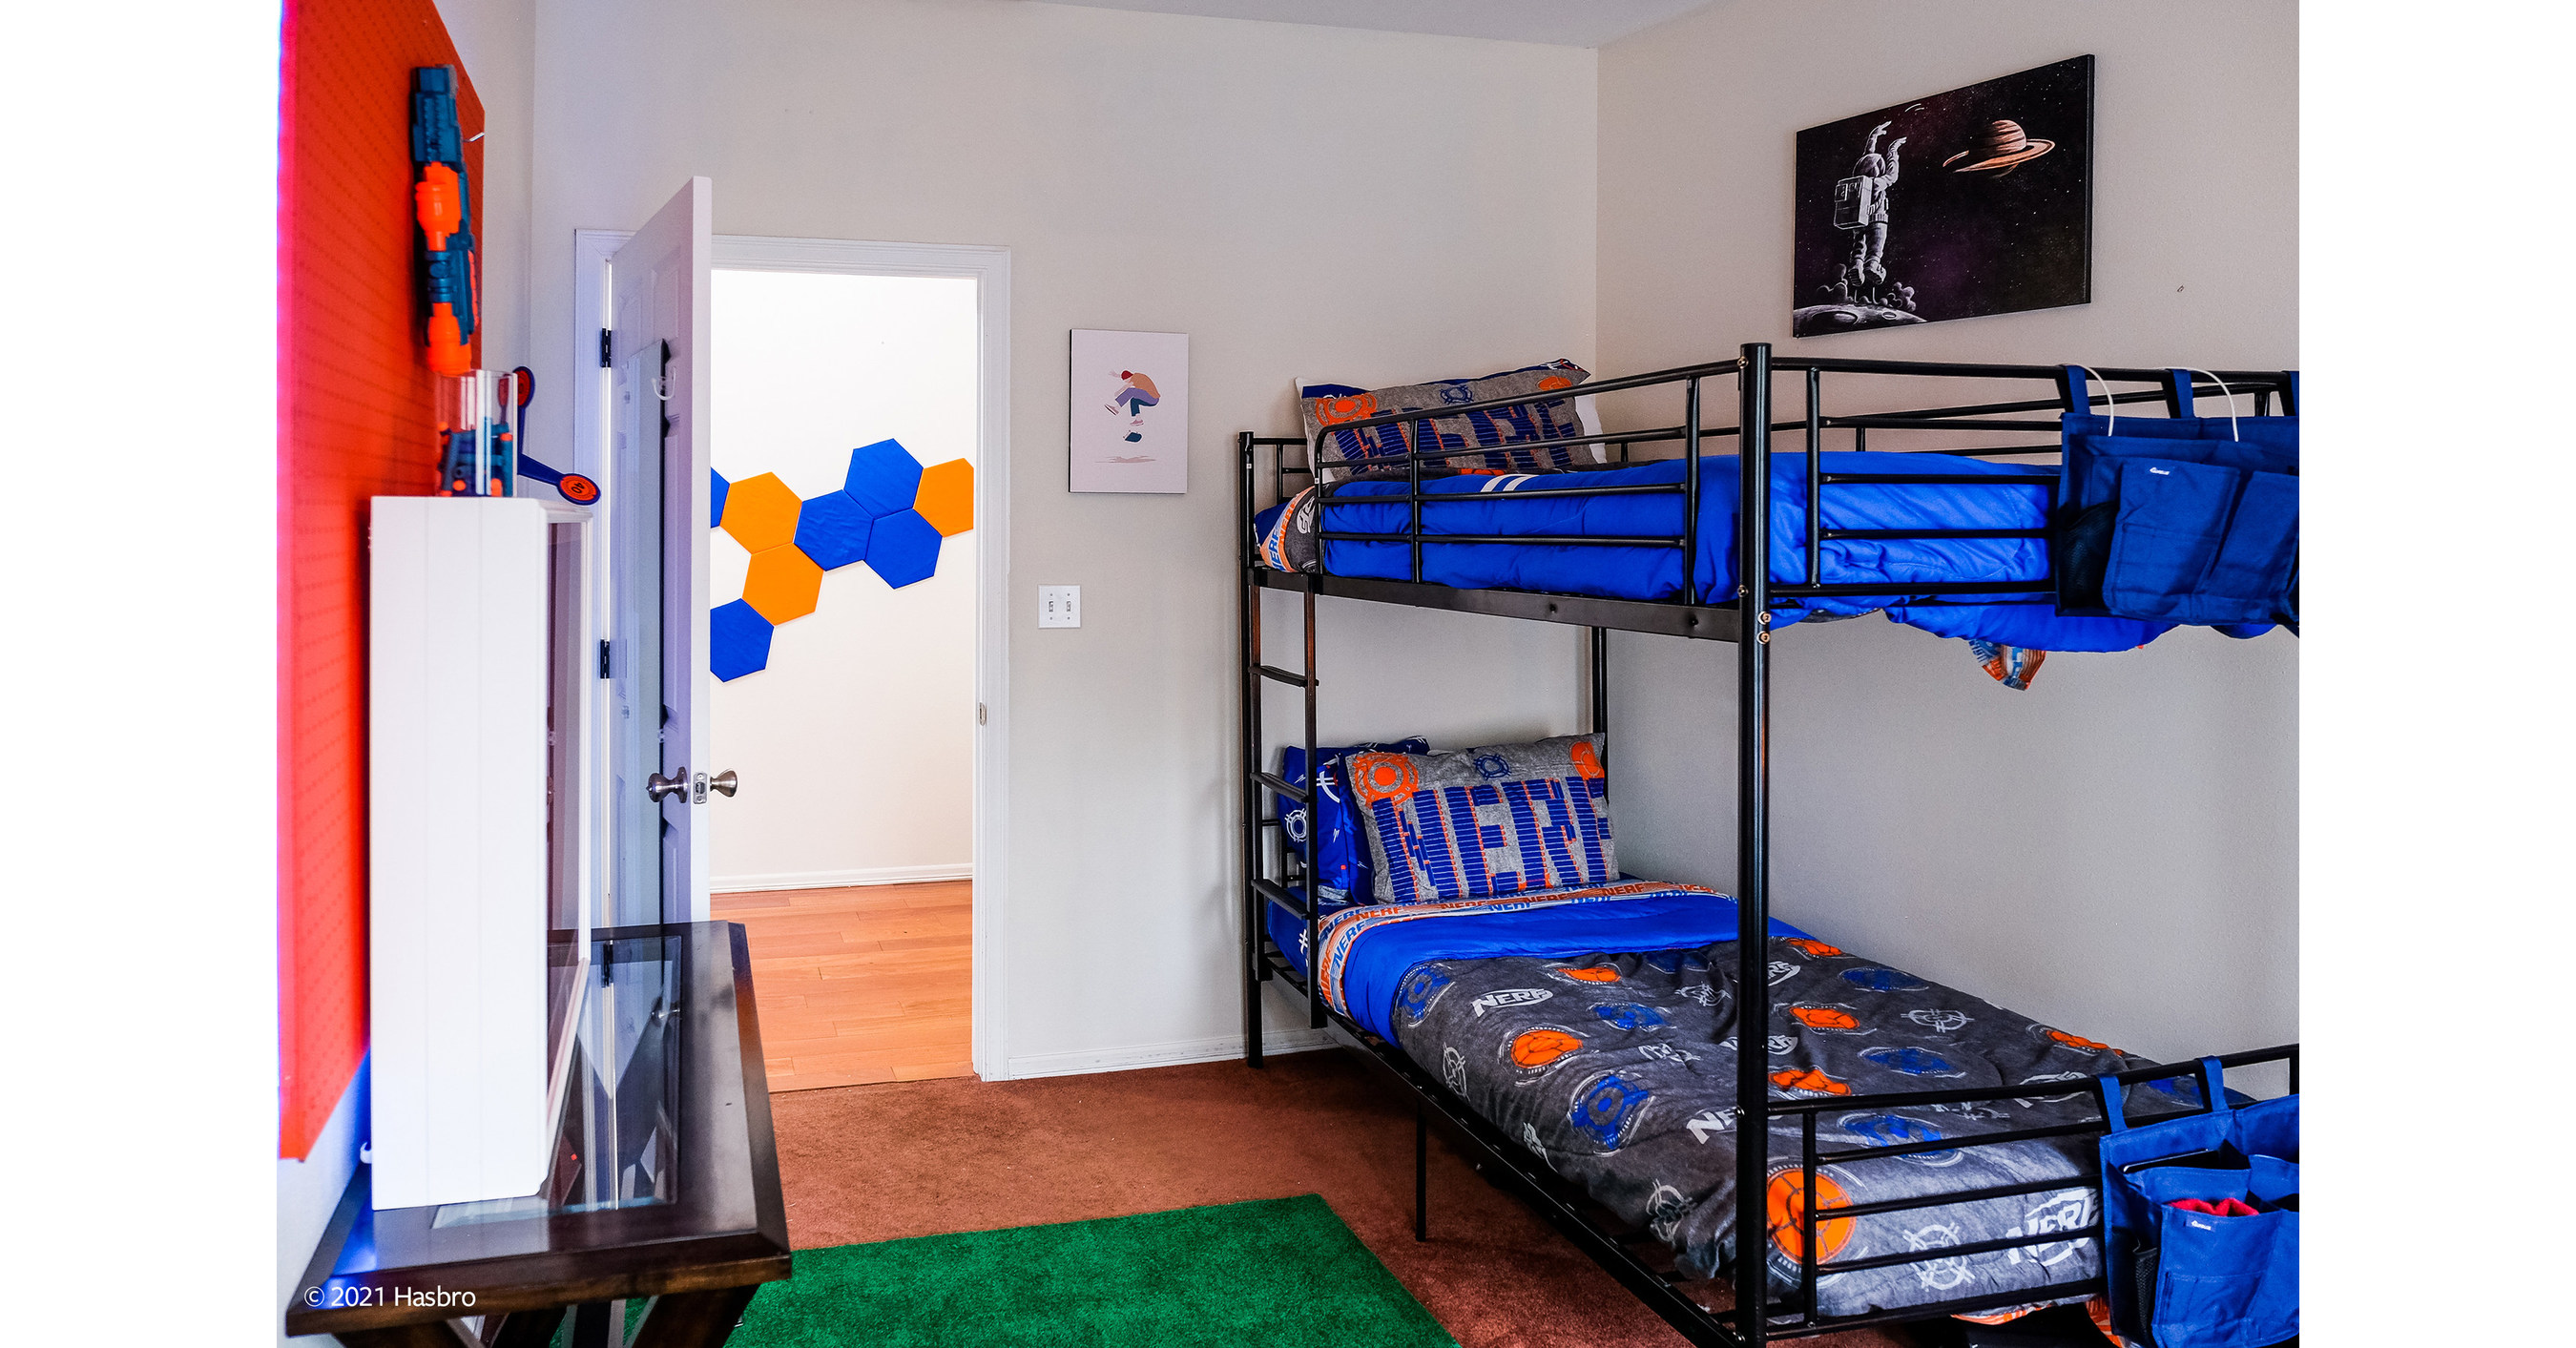 Hasbro and Vrbo team up to offer the chance to book decked out lake house featured in new season "NERF HOUSE SHOWDOWN" series